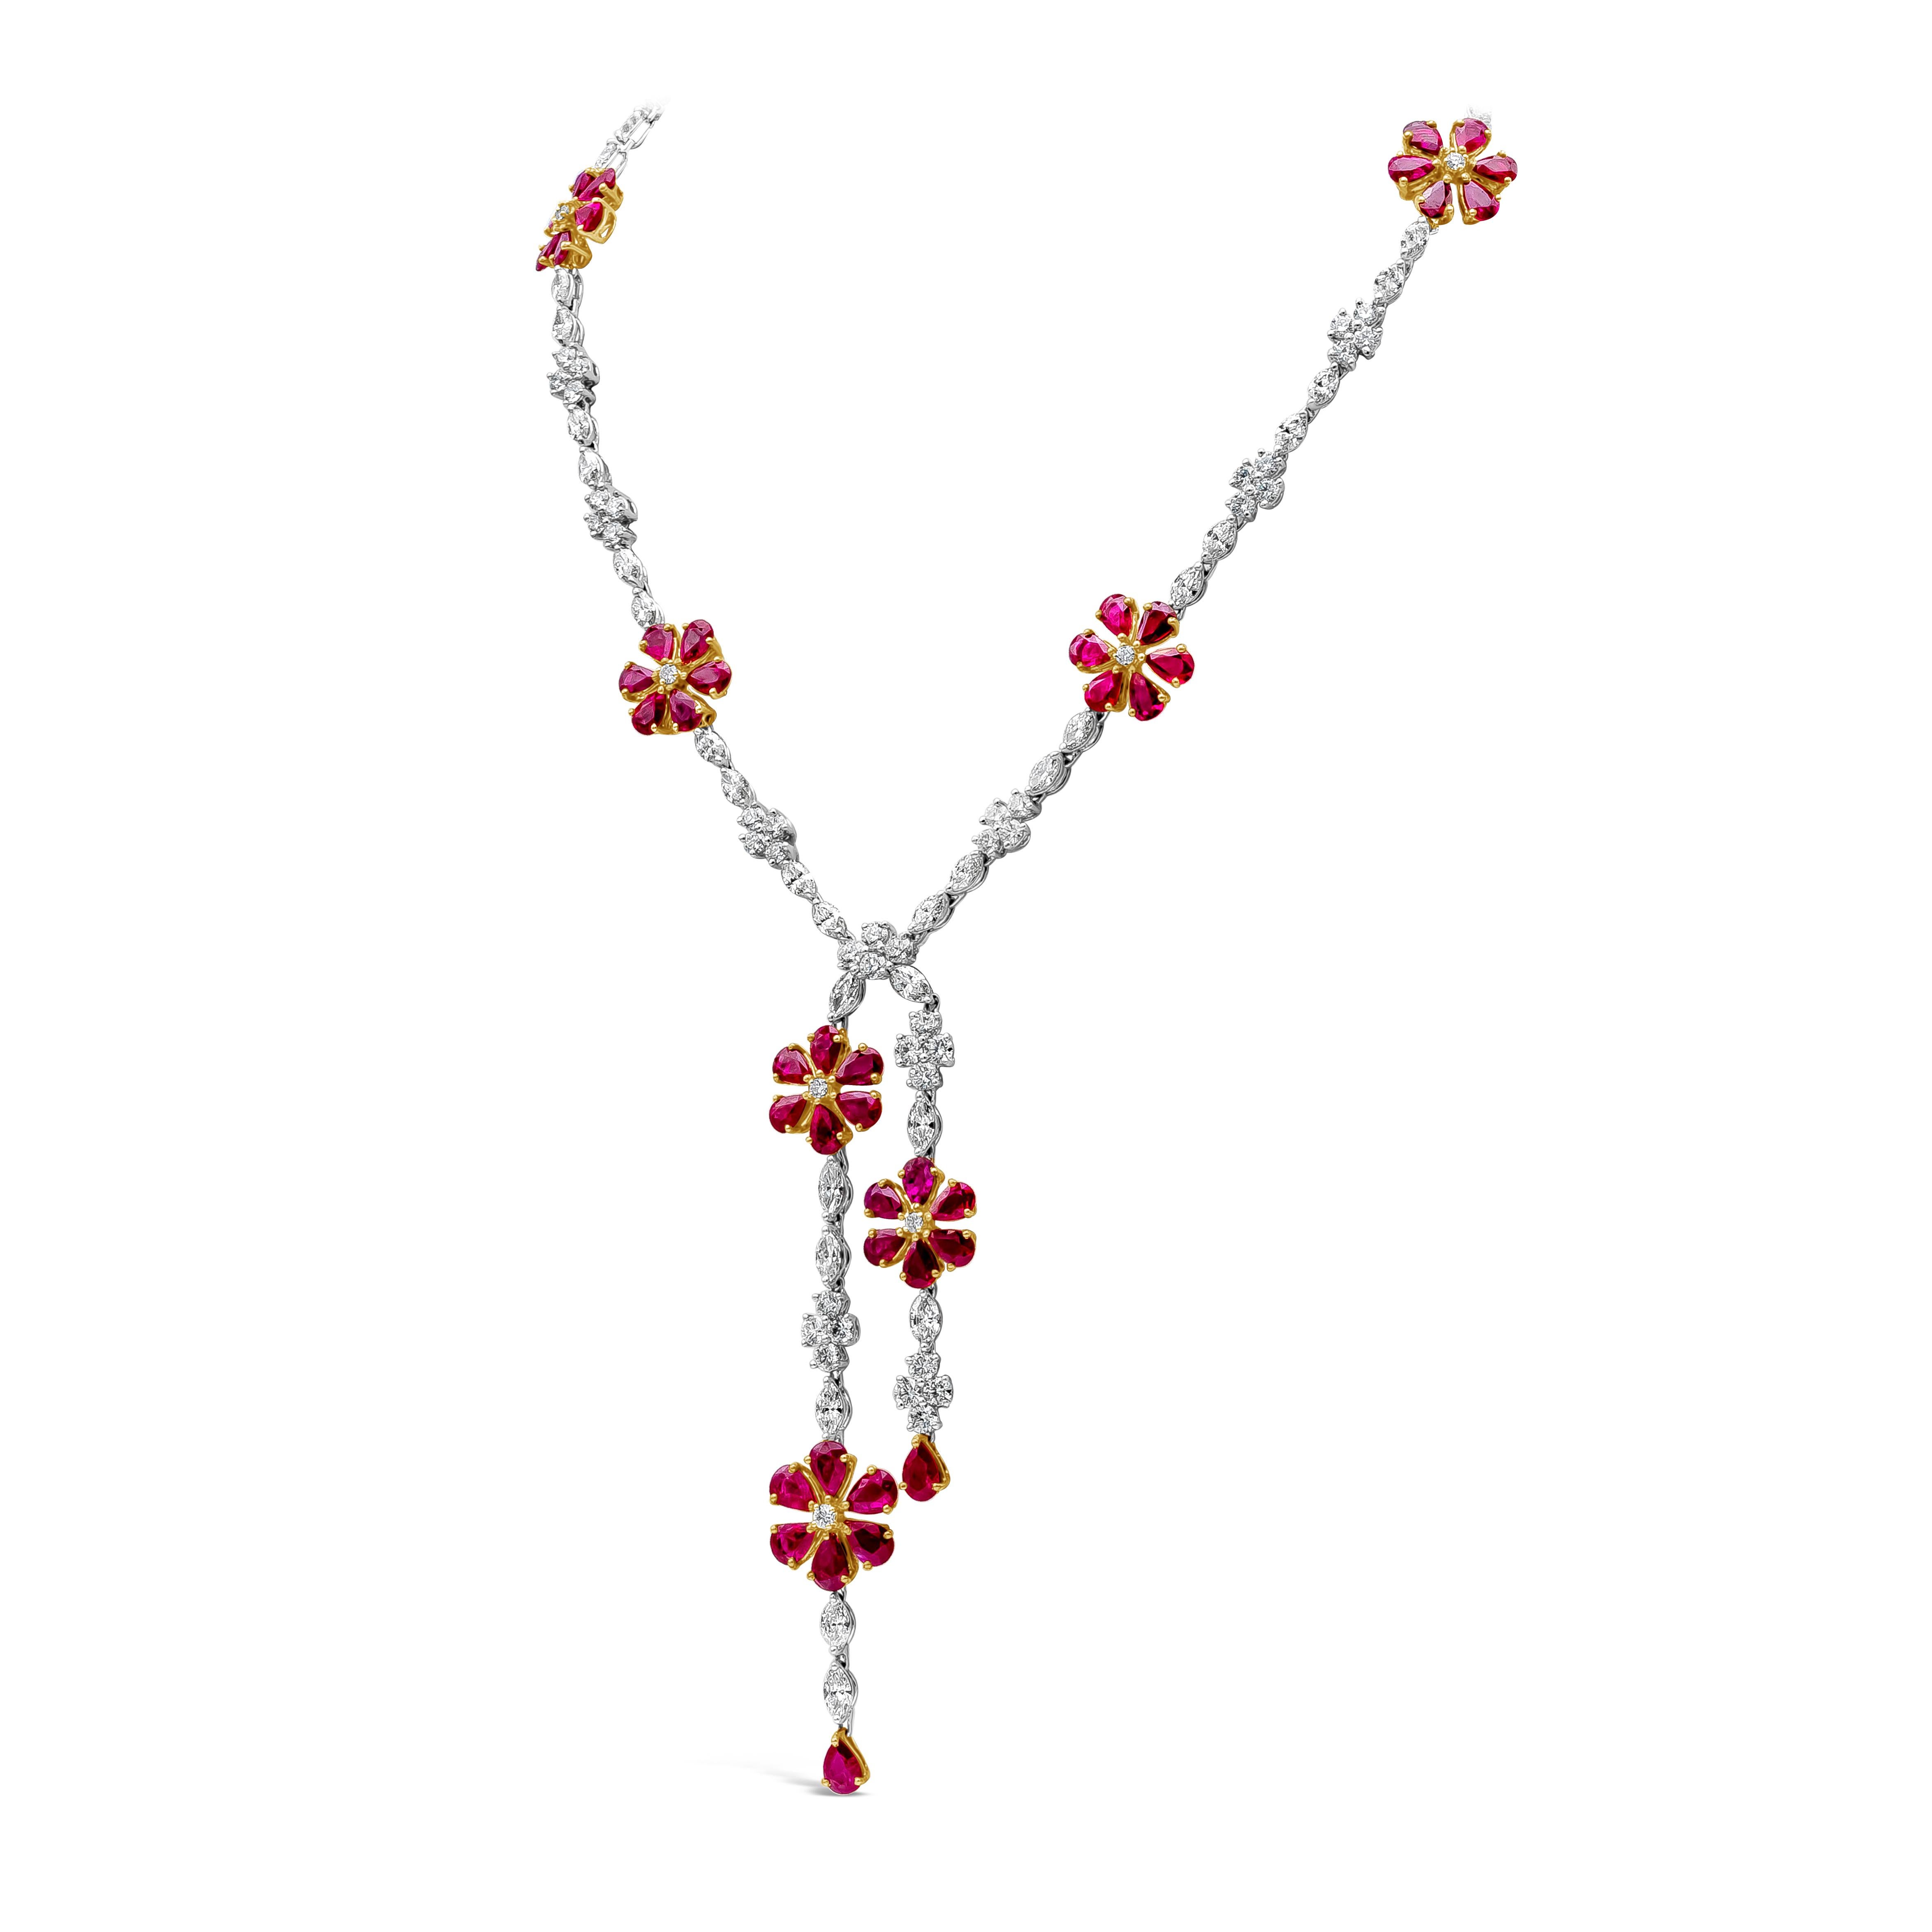 An elegant mixed-cut ruby and diamond necklace showcasing 83 round diamonds weighing 7.40 carats. 47 marquis cut diamonds weighing 9.53 carats, and 44 pear shape rubies weighing 24.97 carats, with a total weight of 41.90 carats. Flower-Motif